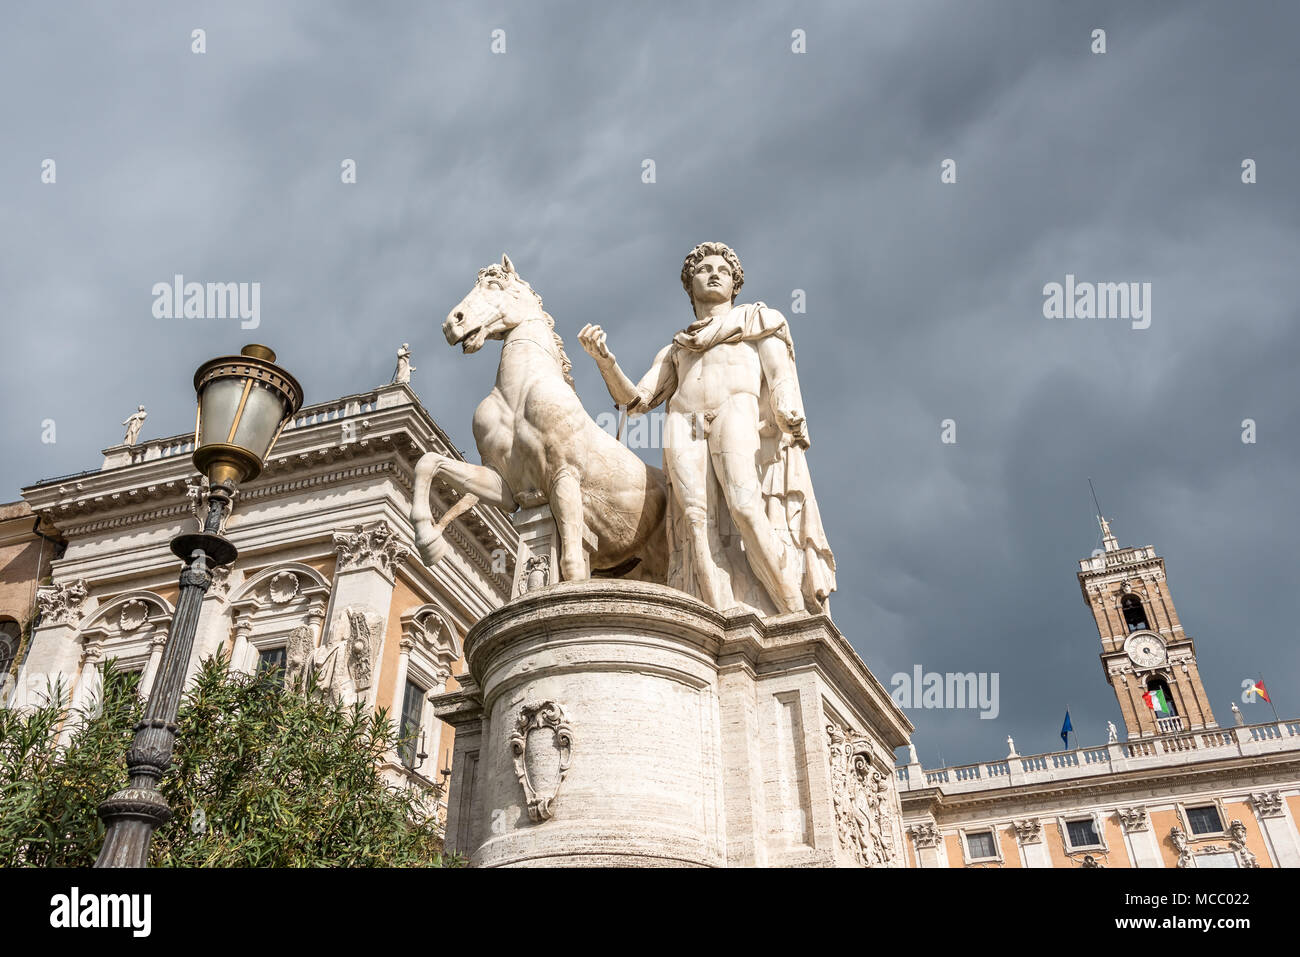 White marble sculpture of Castor and horse against cloudy sky at entrance to Piazza del Campidoglio, looking up from Cordonata stairs, Capitoline Hill Stock Photo